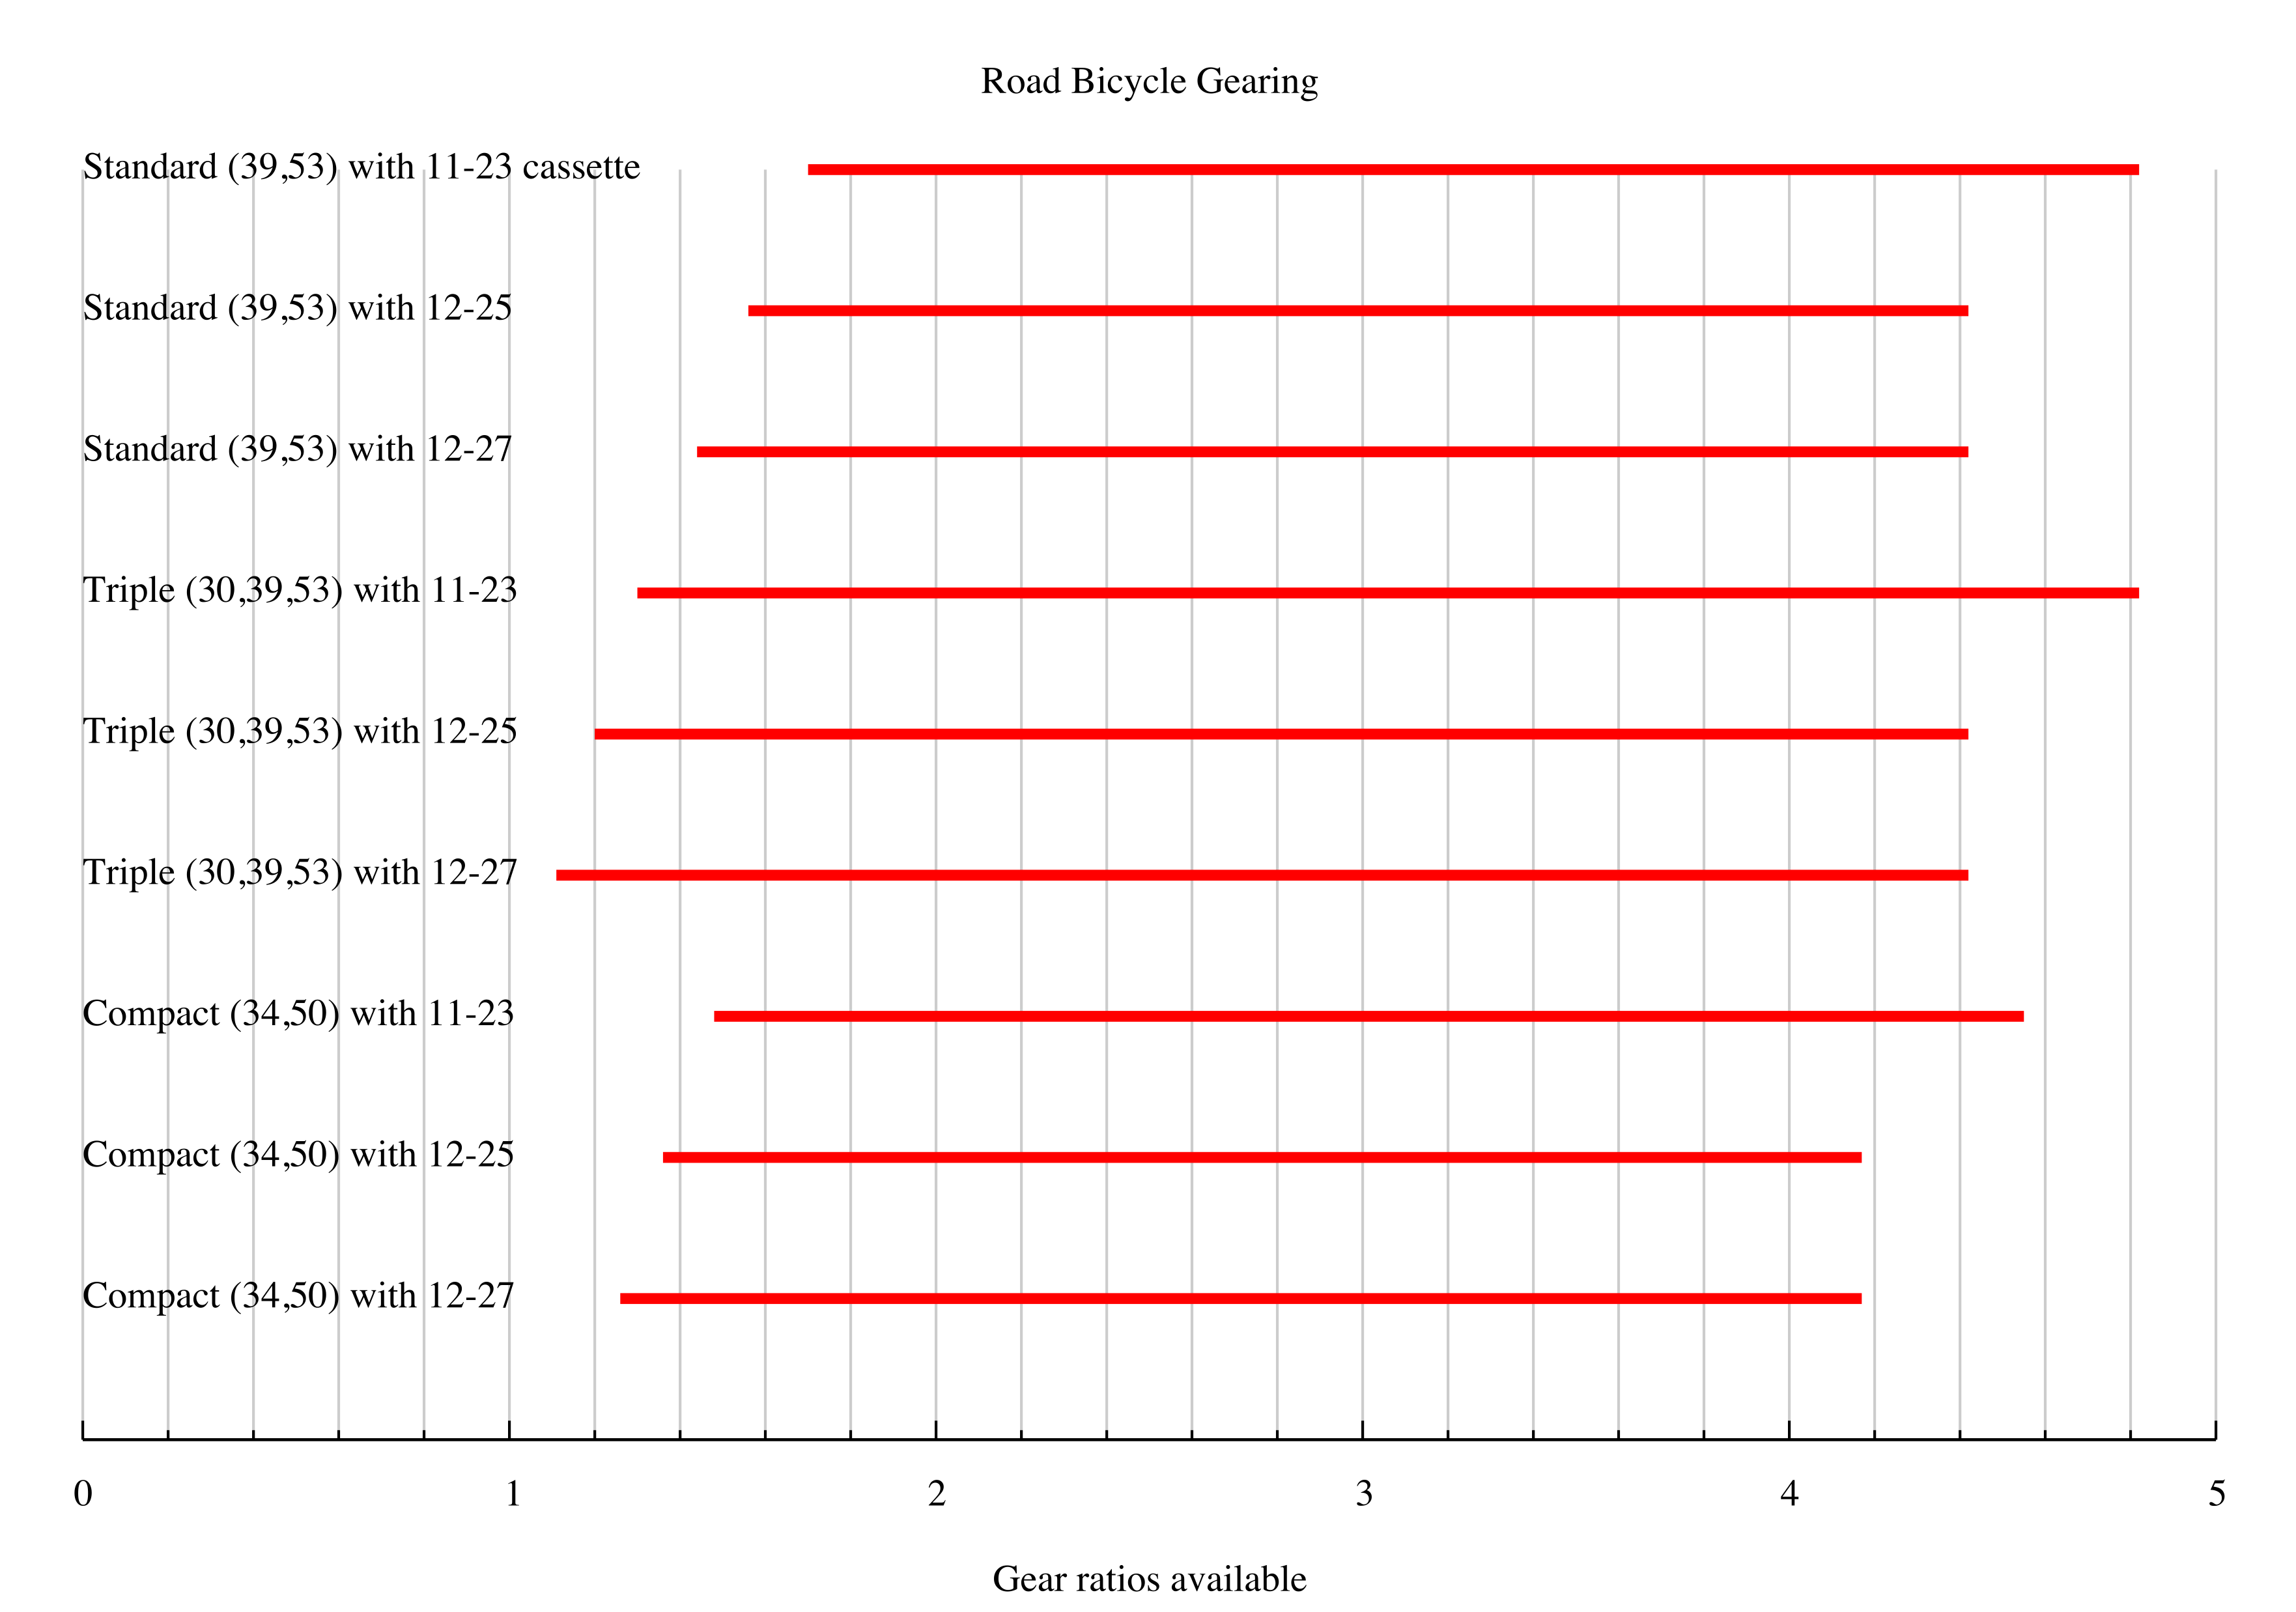 Graph showing gear ratio range for various cycling gear options